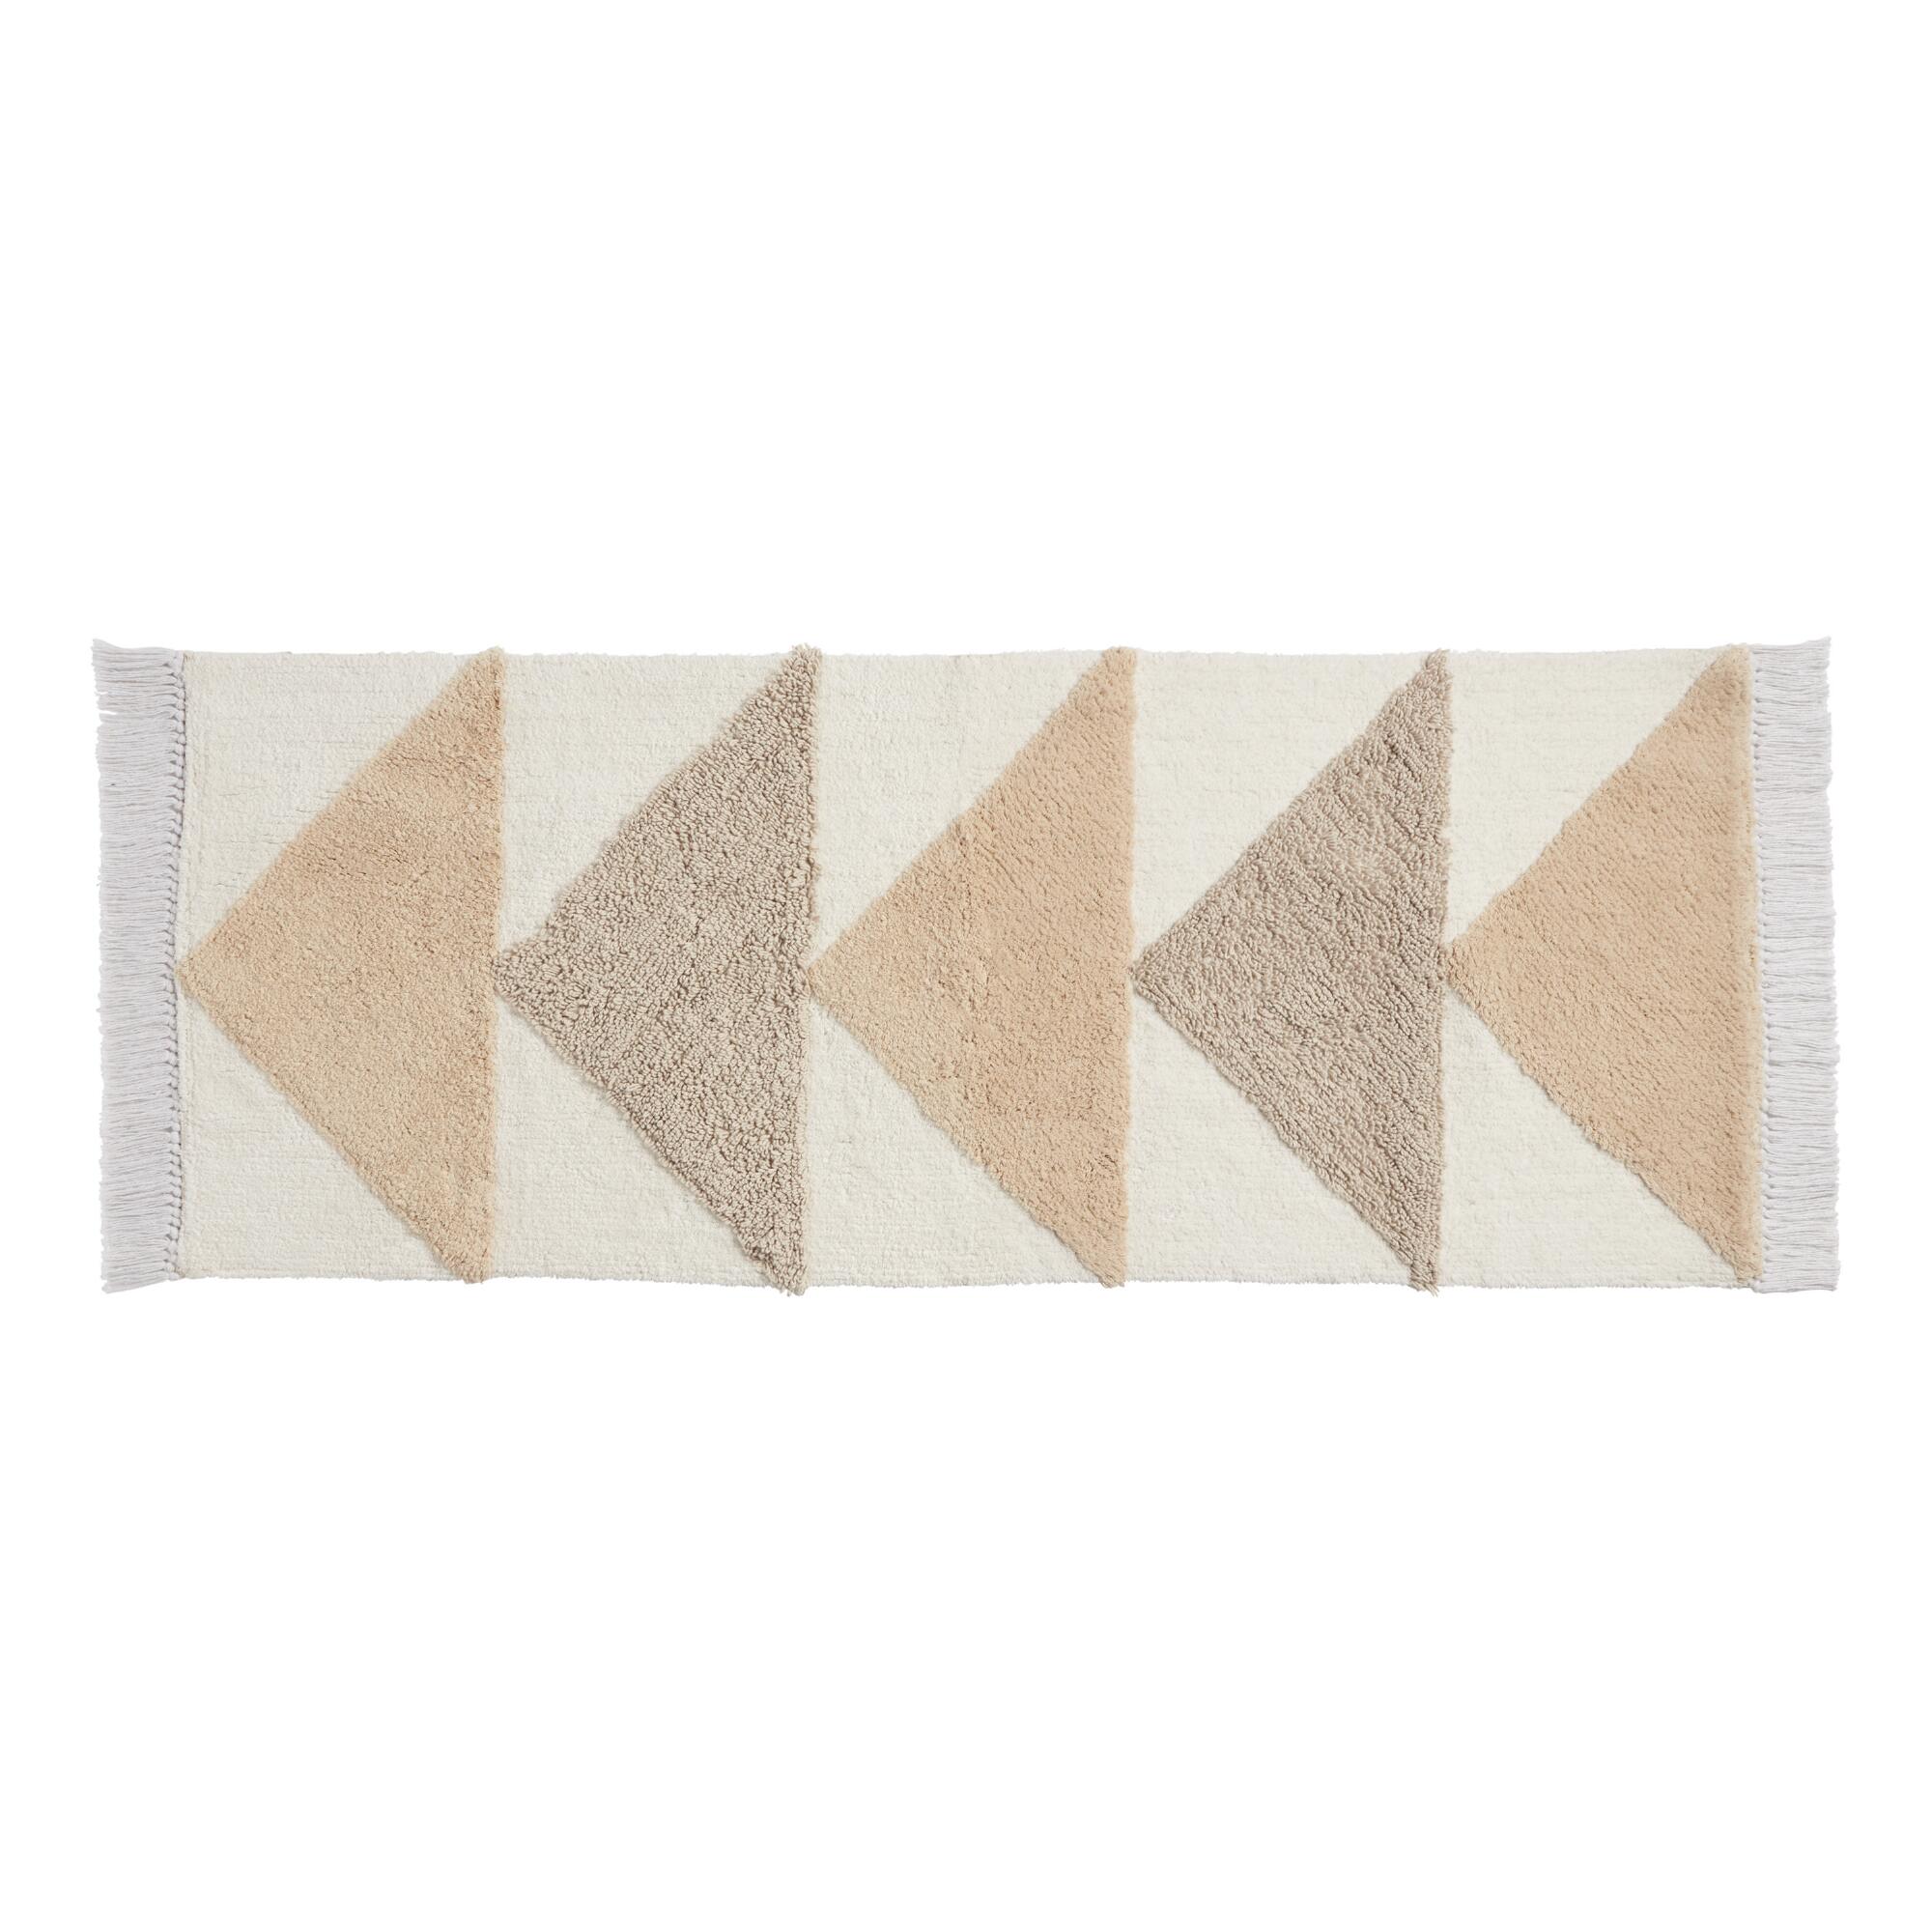 Oversized Tan and Ivory Triangle Tufted Loop Bath Mat: Brown - Cotton by World Market